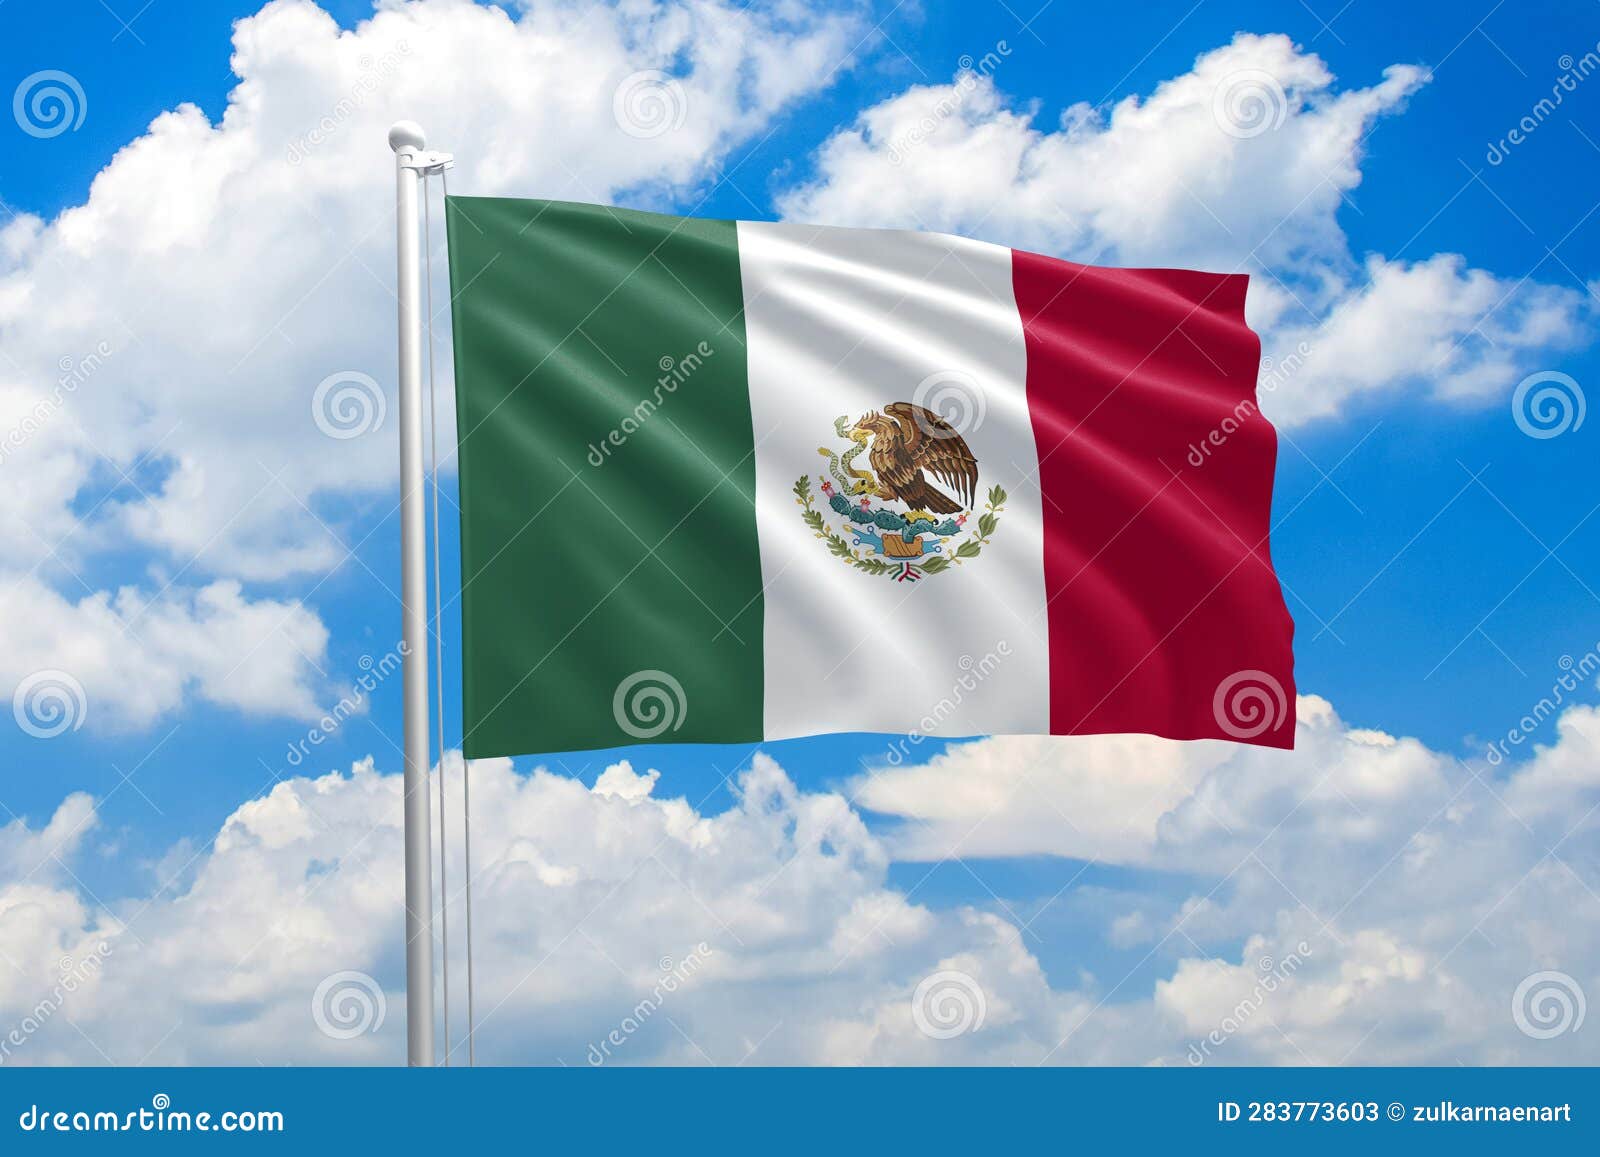 mexico national flag waving in the wind on clouds sky. high quality fabric. international relations concept